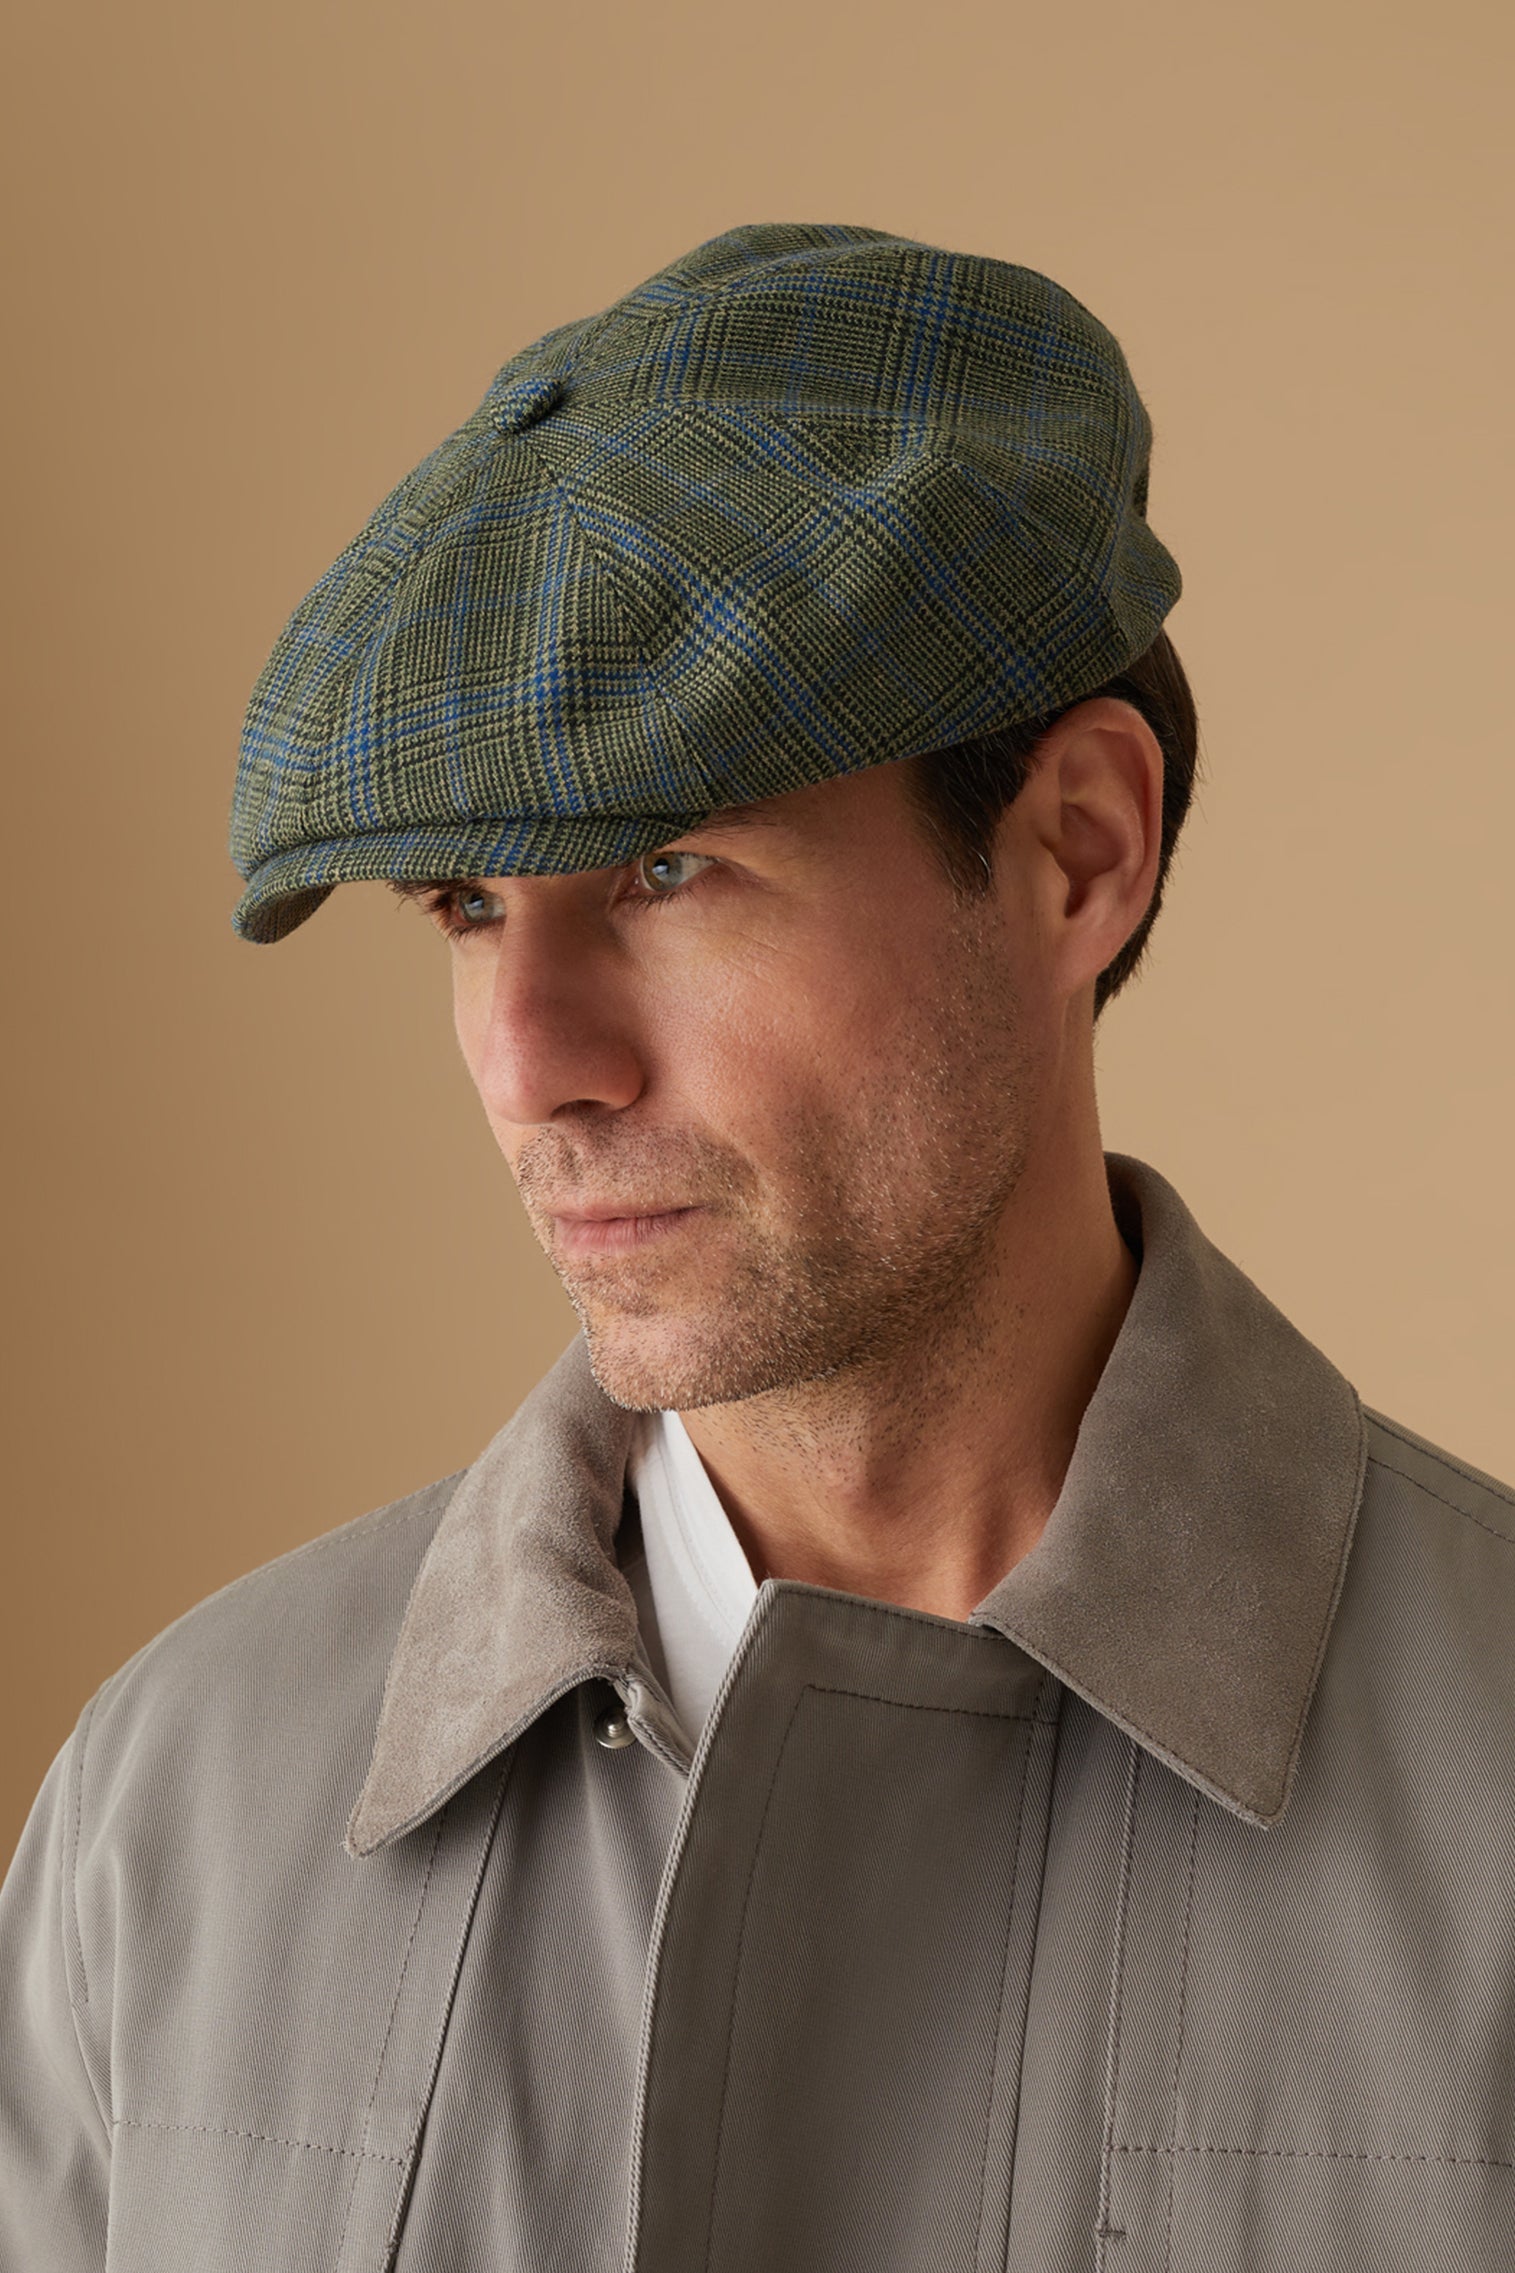 Highgrove Green Bakerboy Cap - Products - Lock & Co. Hatters London UK